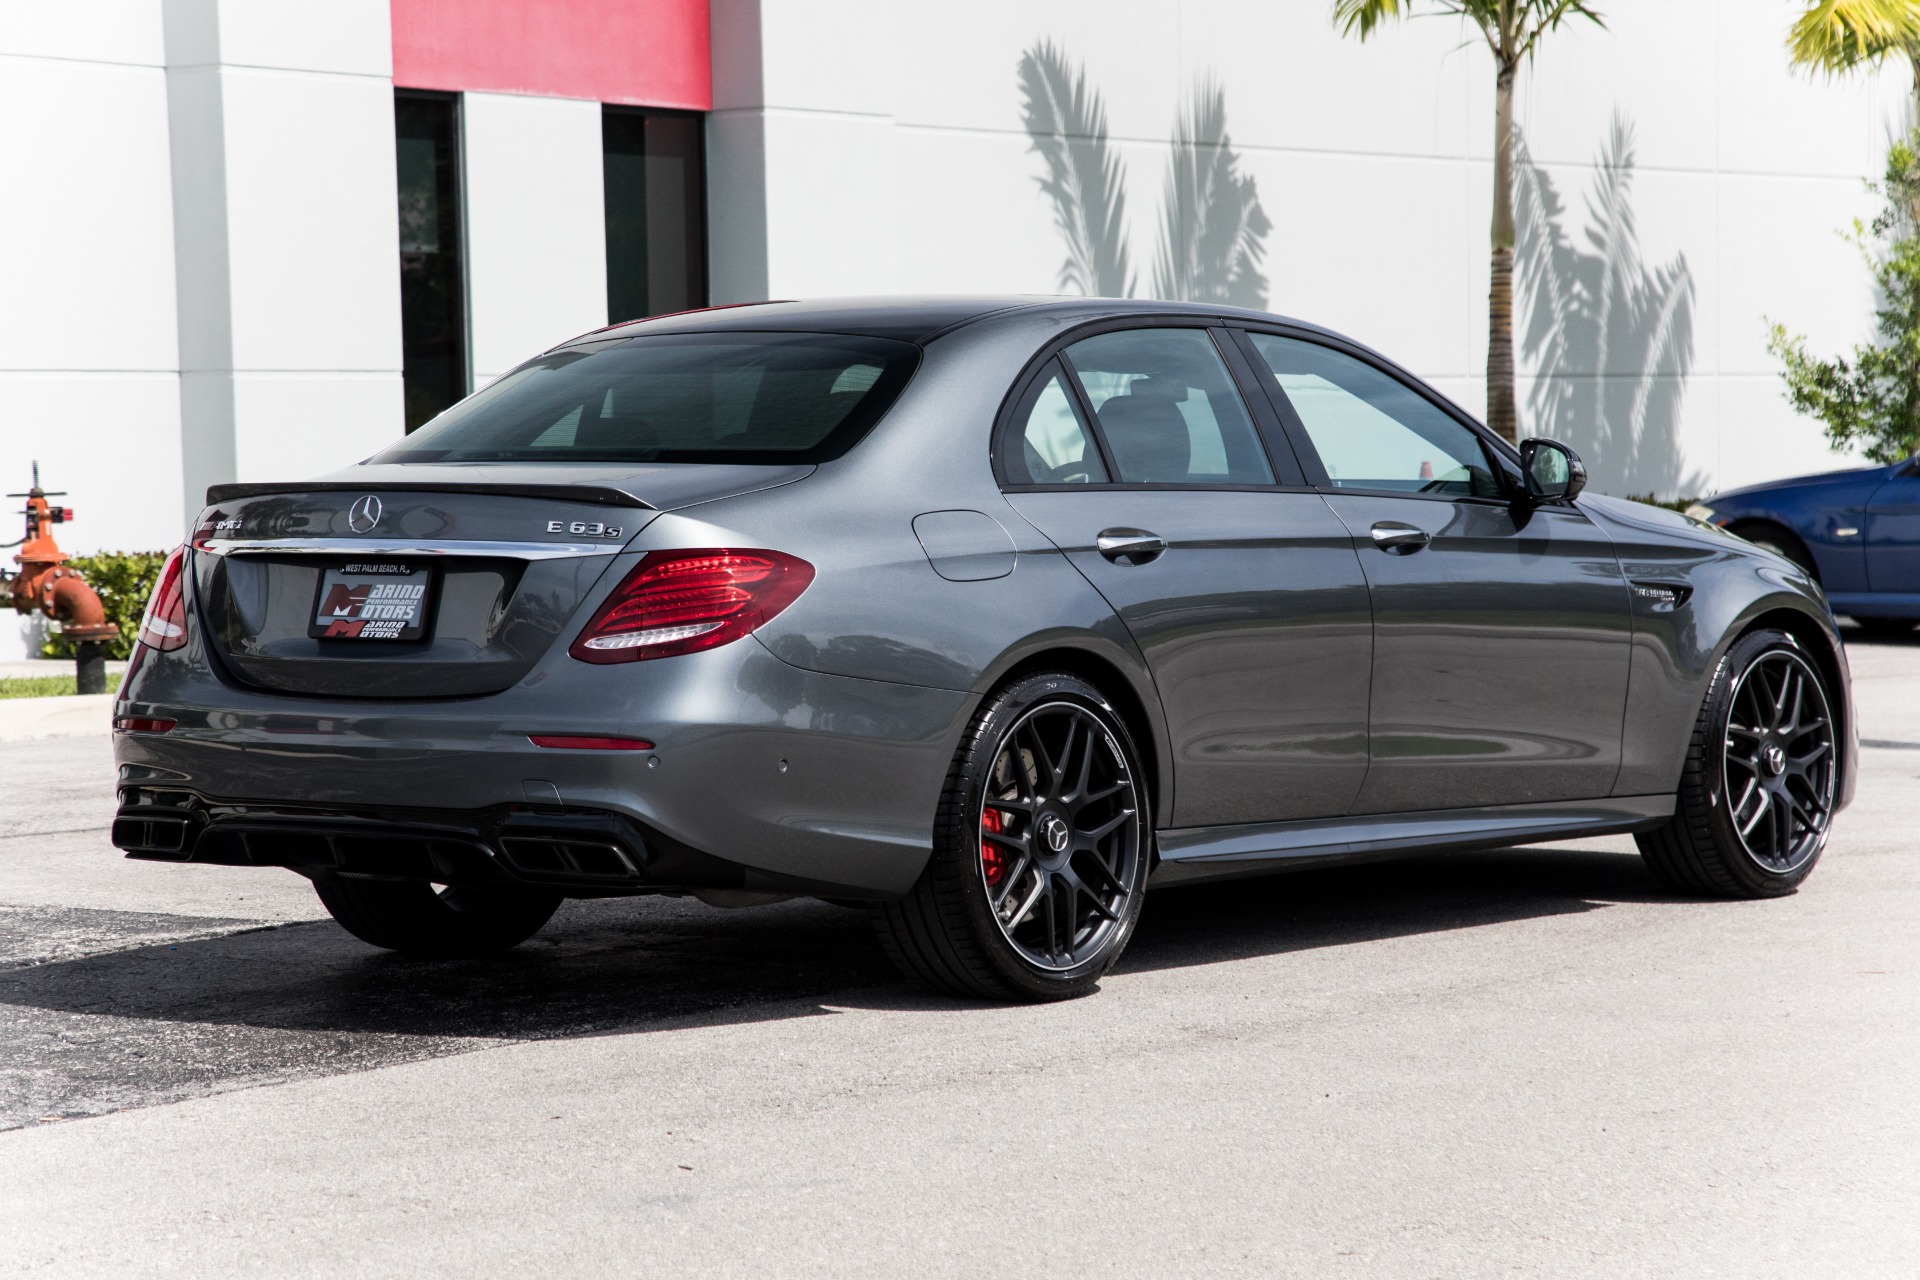 Used 2019 MercedesBenz EClass AMG E 63 S For Sale